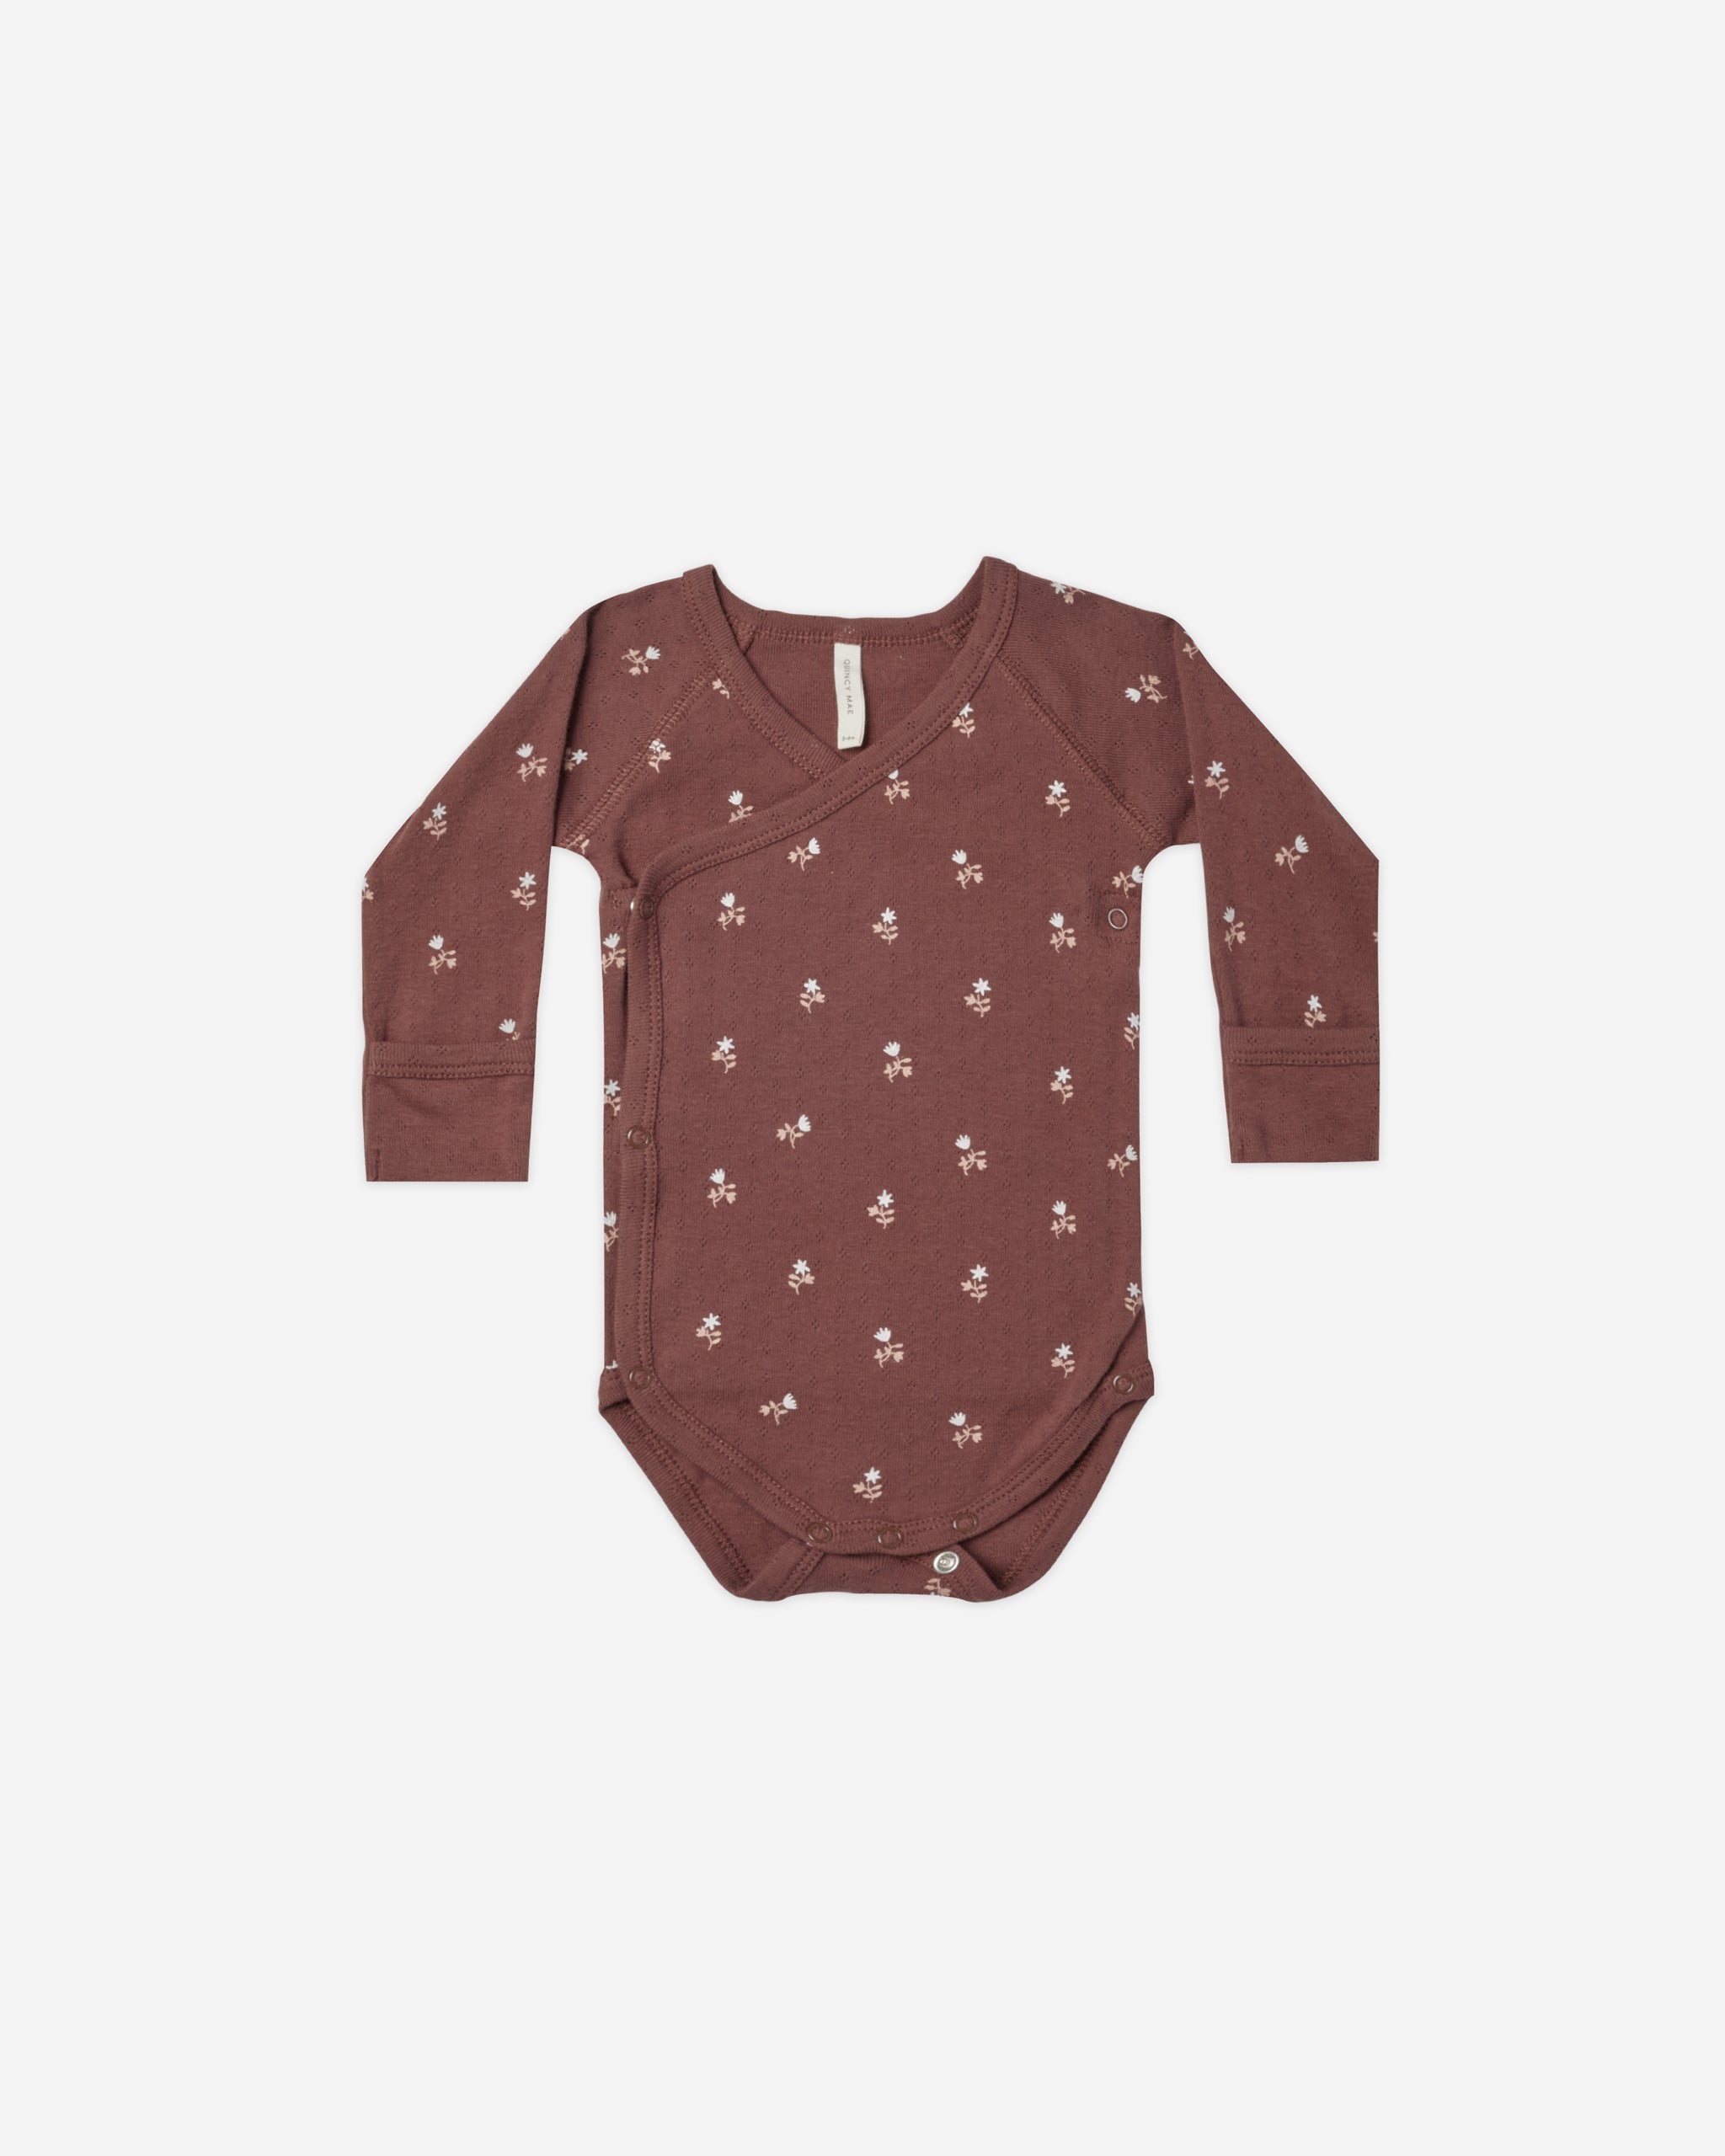 Side-Snap Bodysuit || Plum Fleur - Rylee + Cru | Kids Clothes | Trendy Baby Clothes | Modern Infant Outfits |